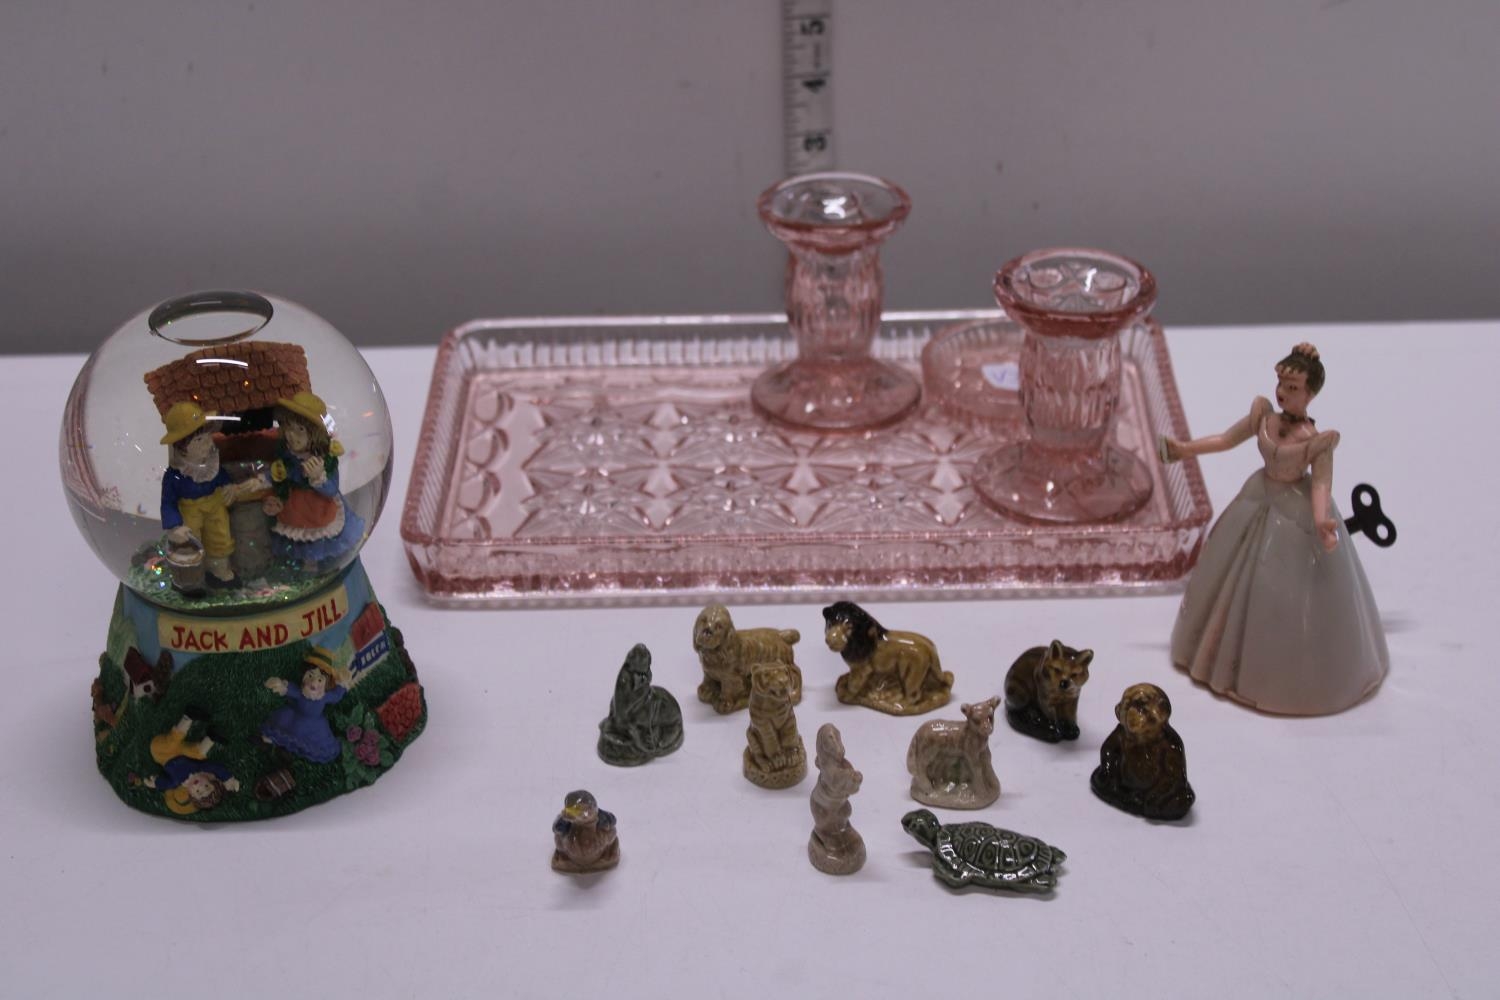 A vintage pink glass dressing table set and other collectables including whimsies etc